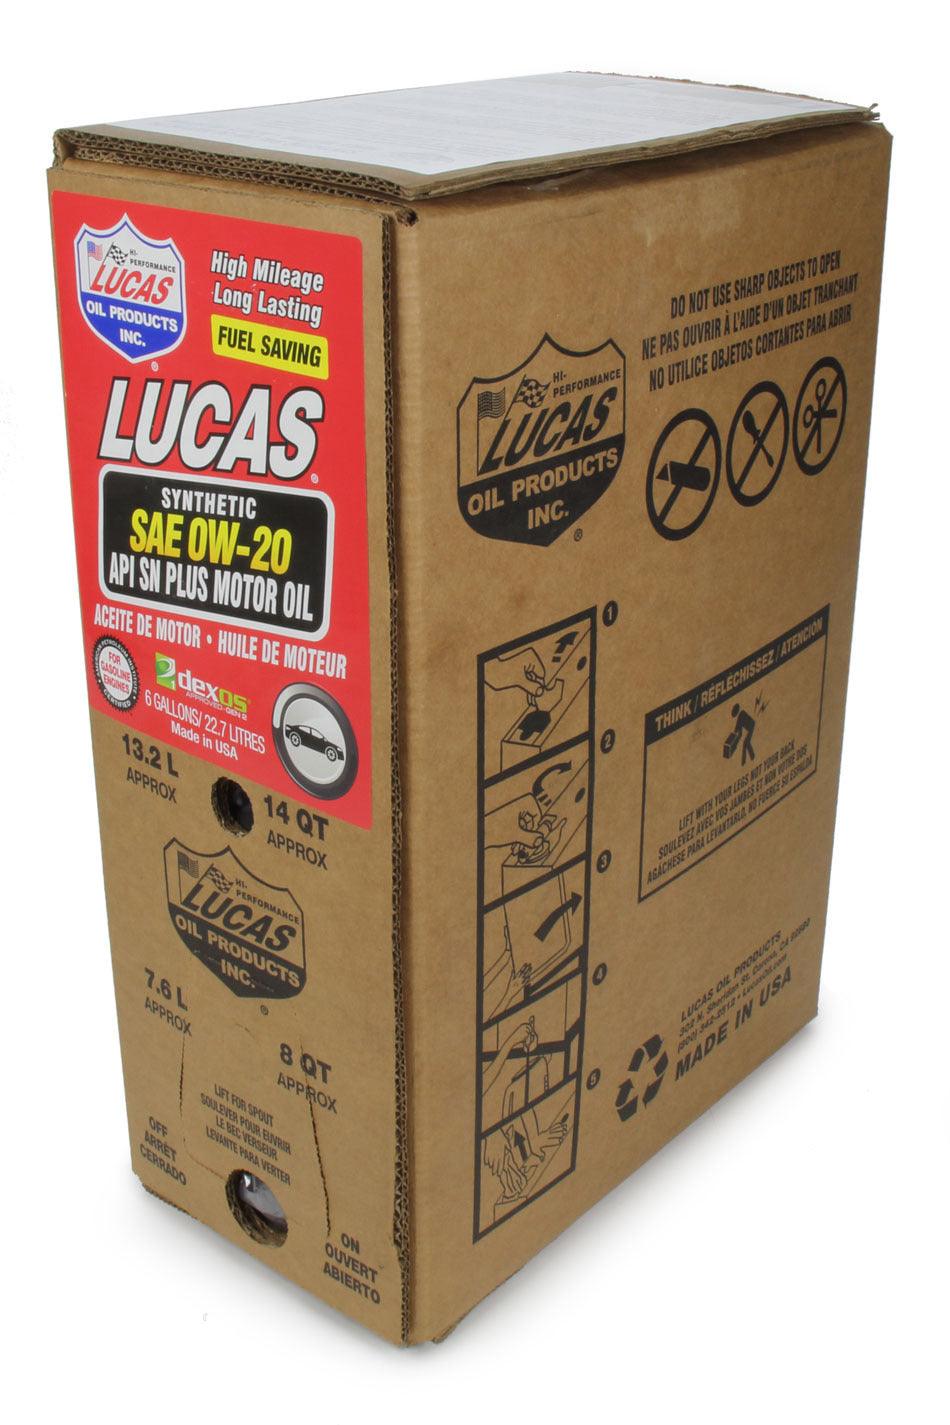 Synthetic SAE 0W20 Oil 6 Gallon Bag In Box Dexos - Burlile Performance Products